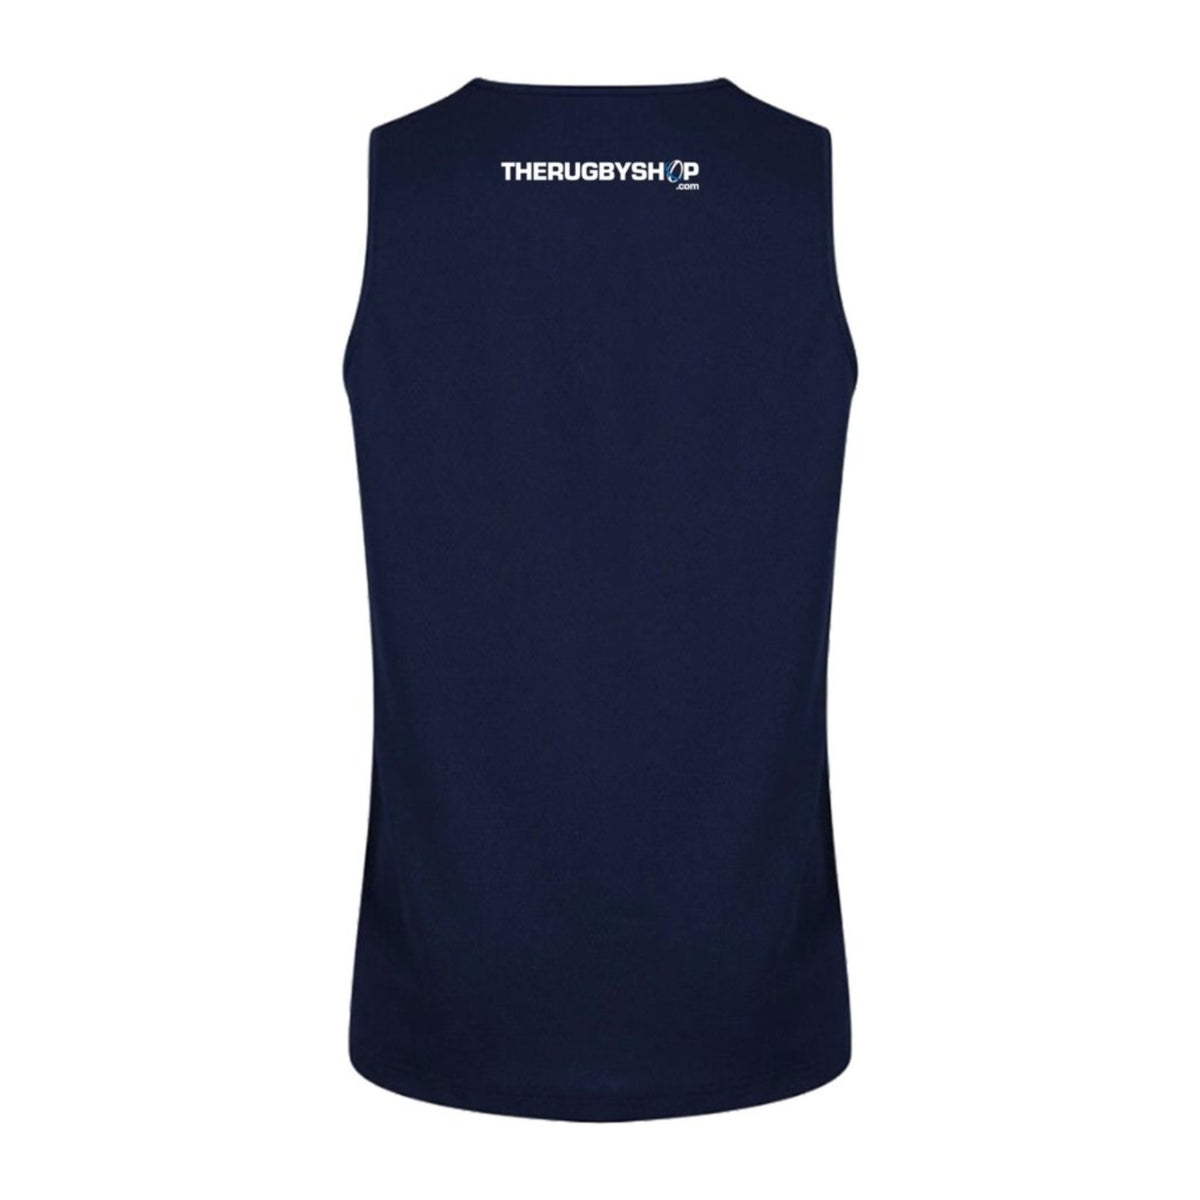 Rugby Ontario Referees CCC Club Dry Singlet - www.therugbyshop.com www.therugbyshop.com TRS Distribution Canada TANKS Rugby Ontario Referees CCC Club Dry Singlet